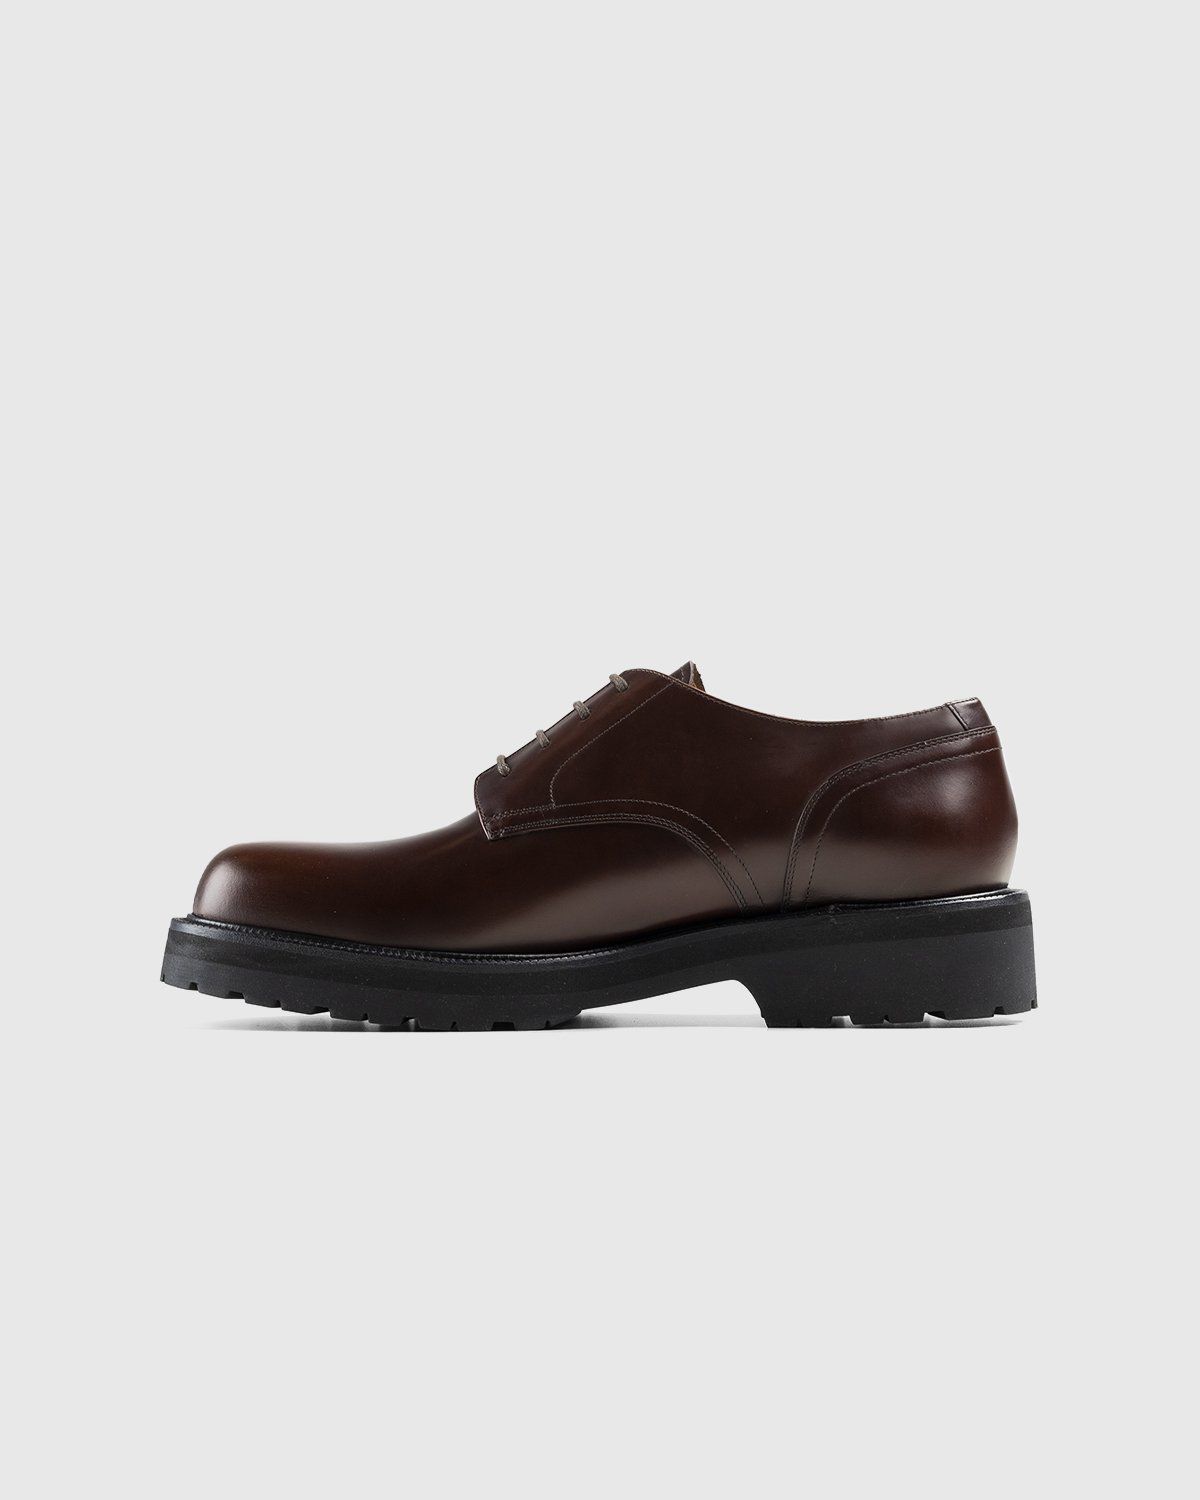 Dries Van Noten – Leather Lace-Up Derby Shoes Brown - Image 2